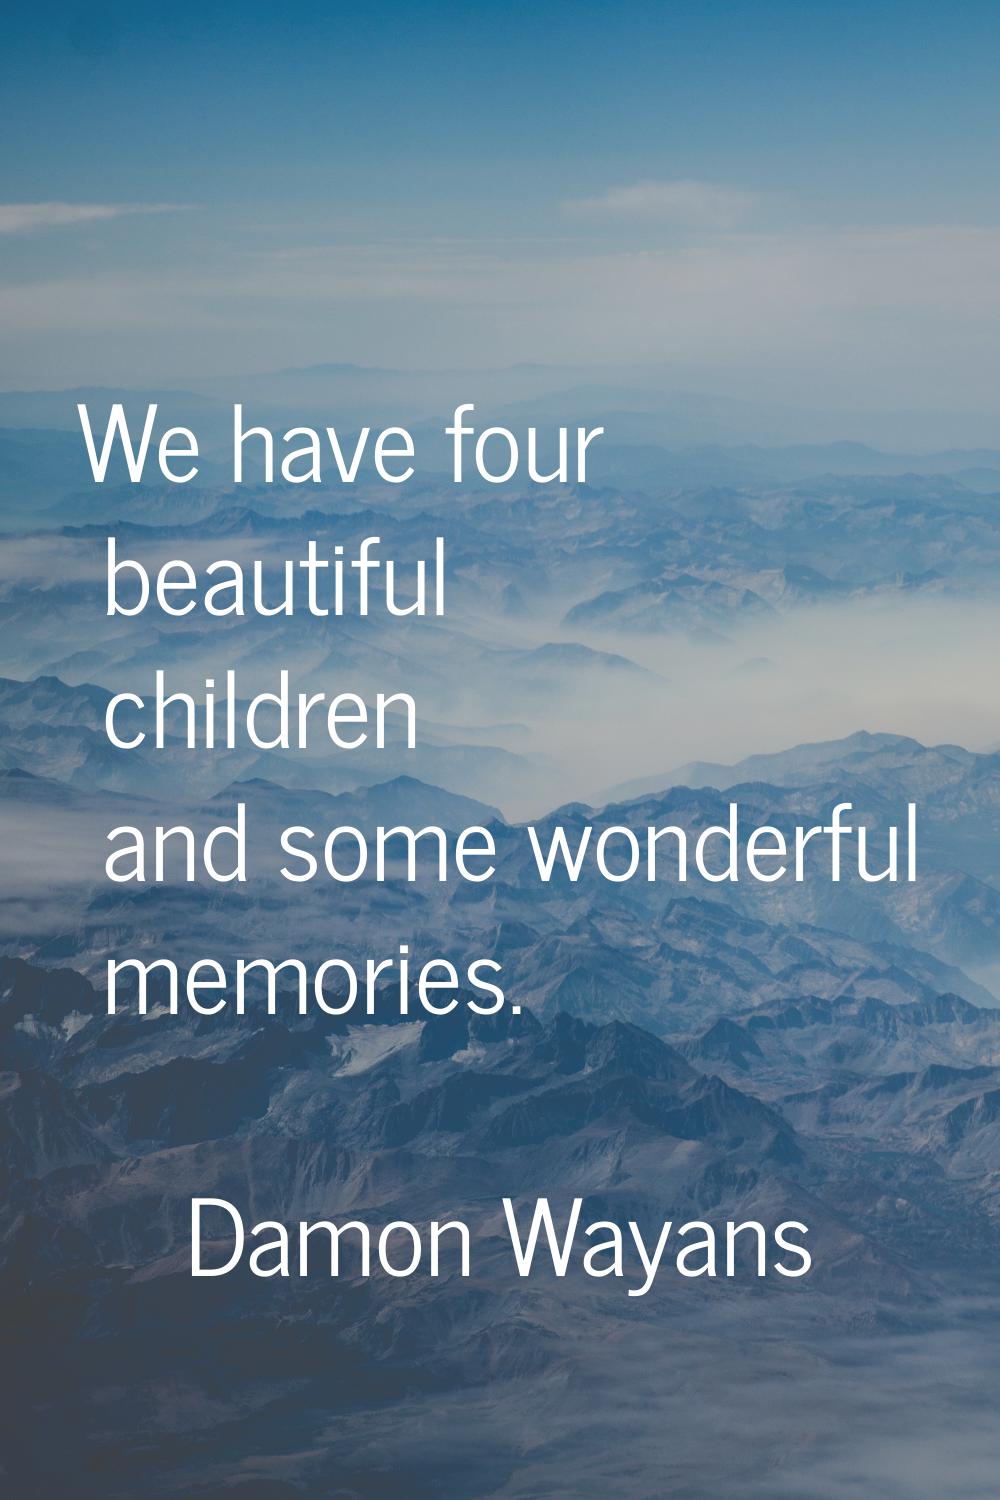 We have four beautiful children and some wonderful memories.